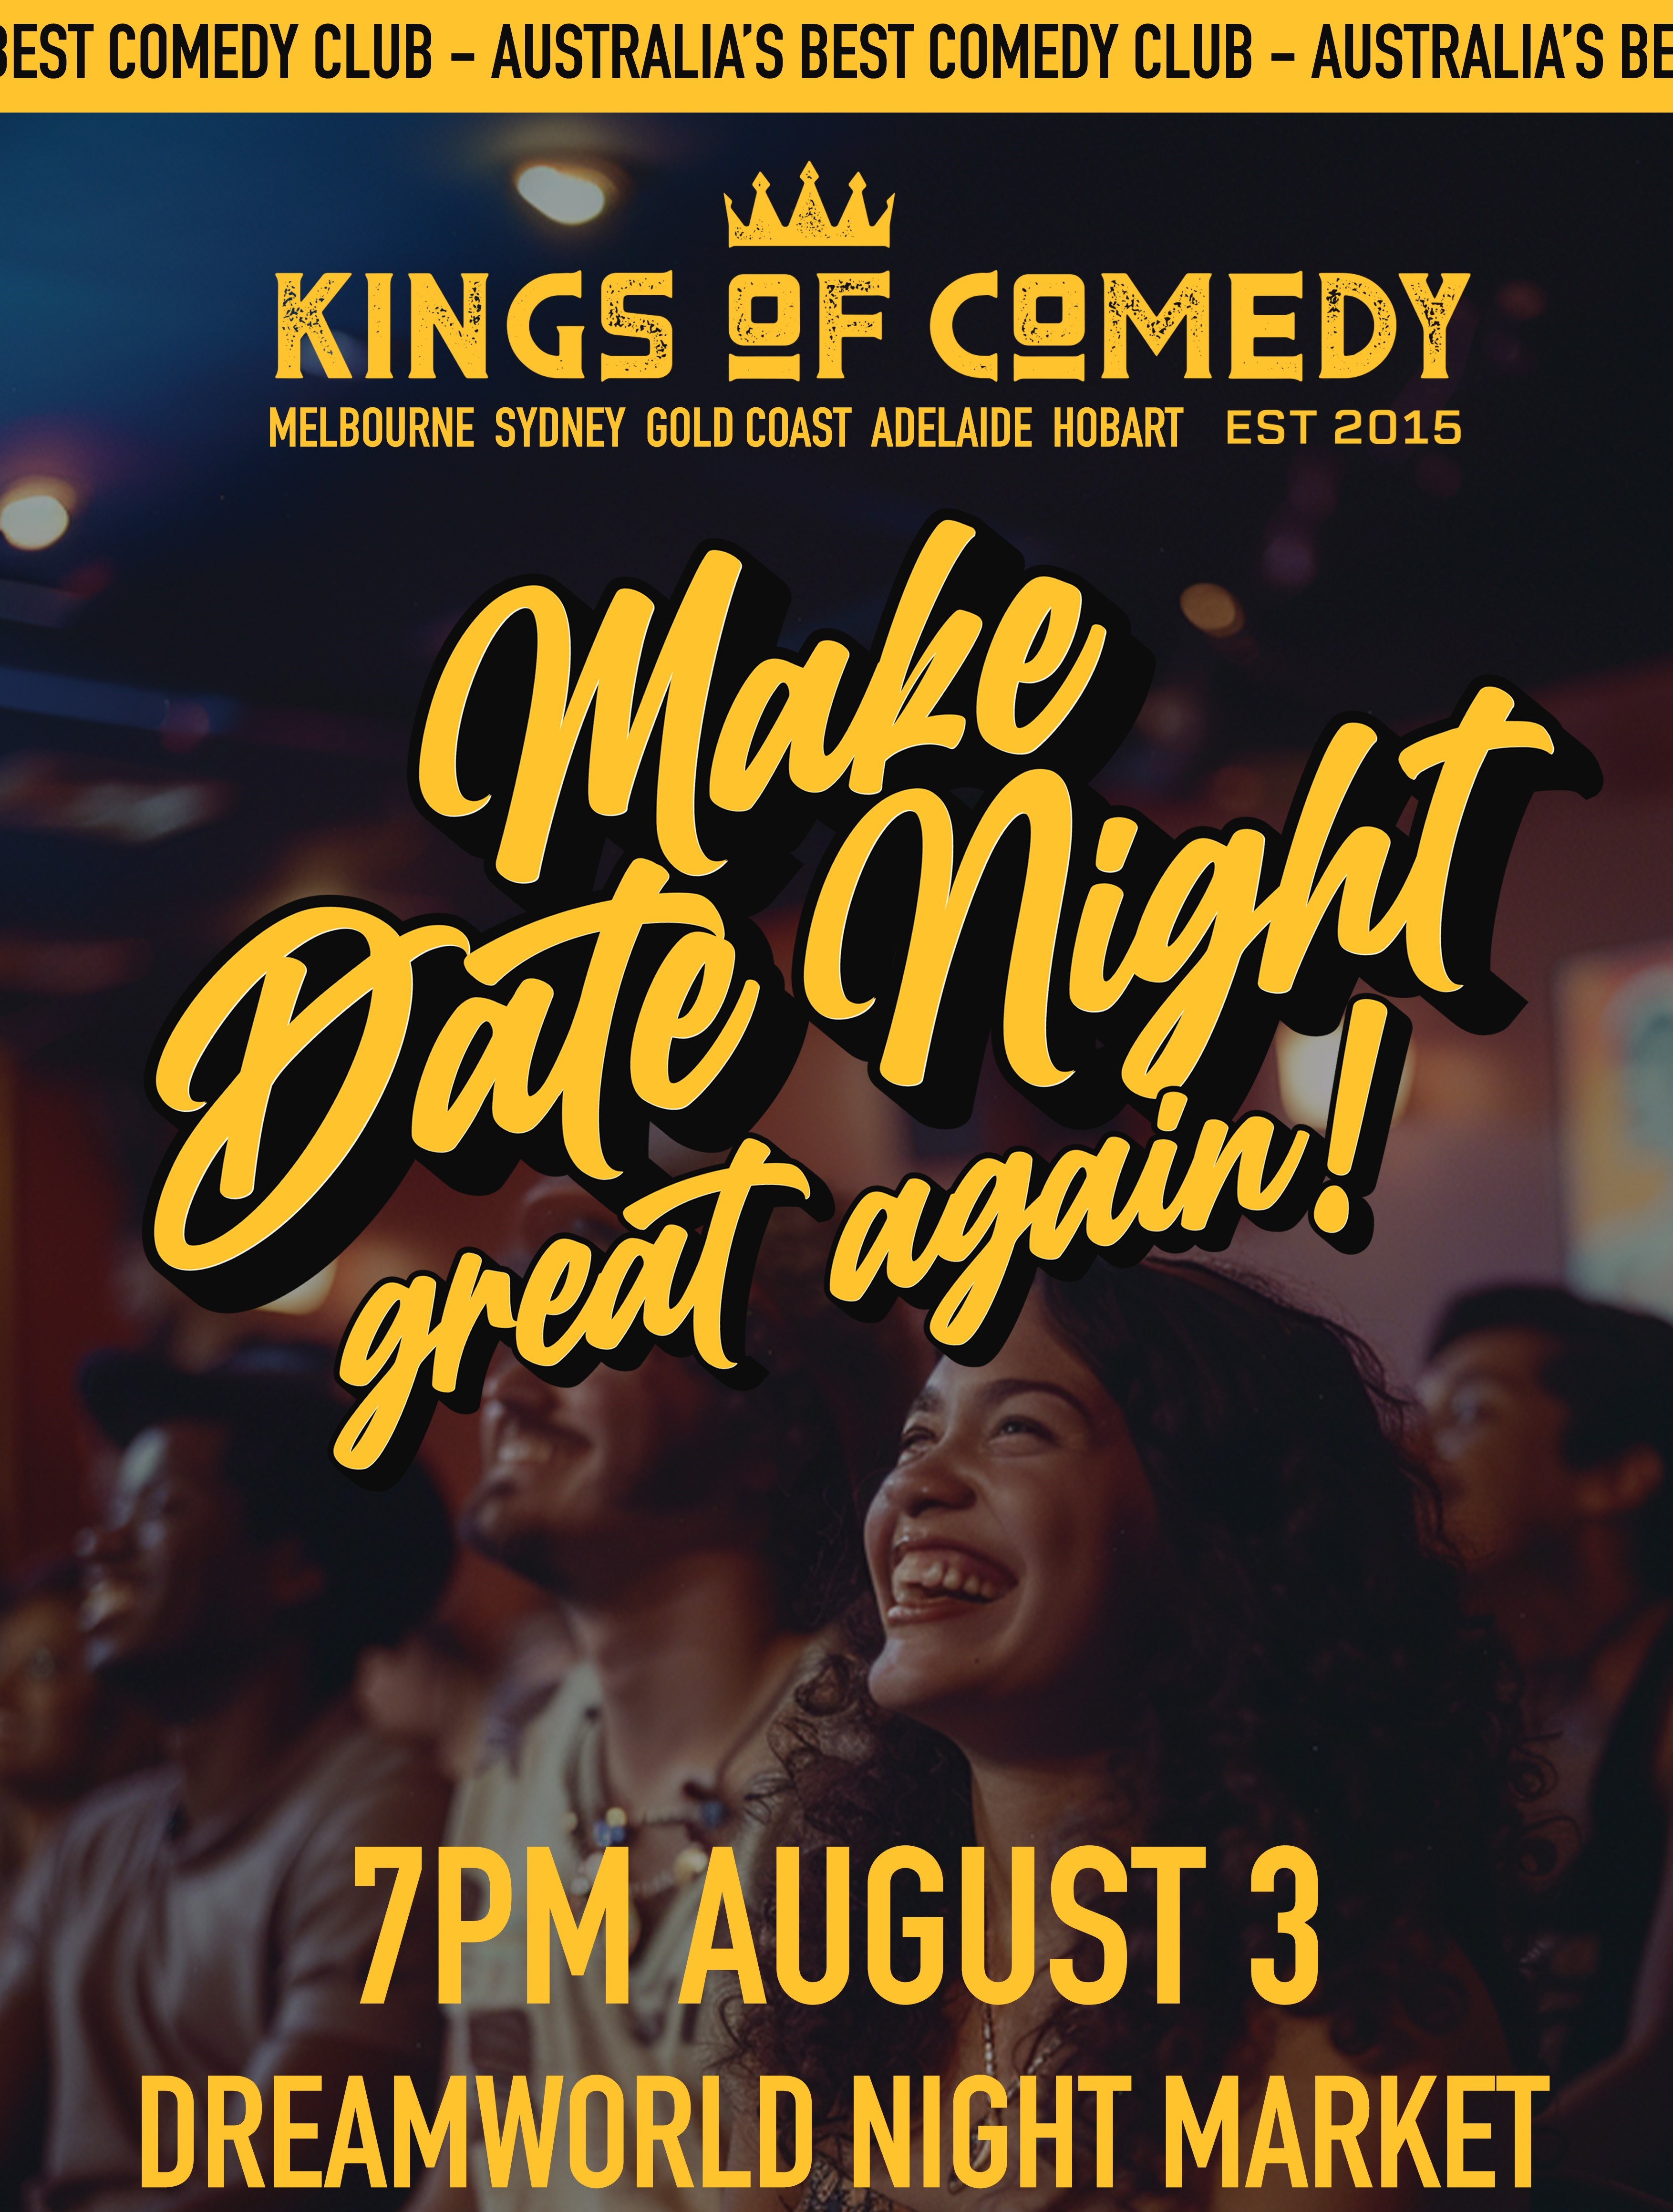 3 August - KINGS OF COMEDY ARE BACK!